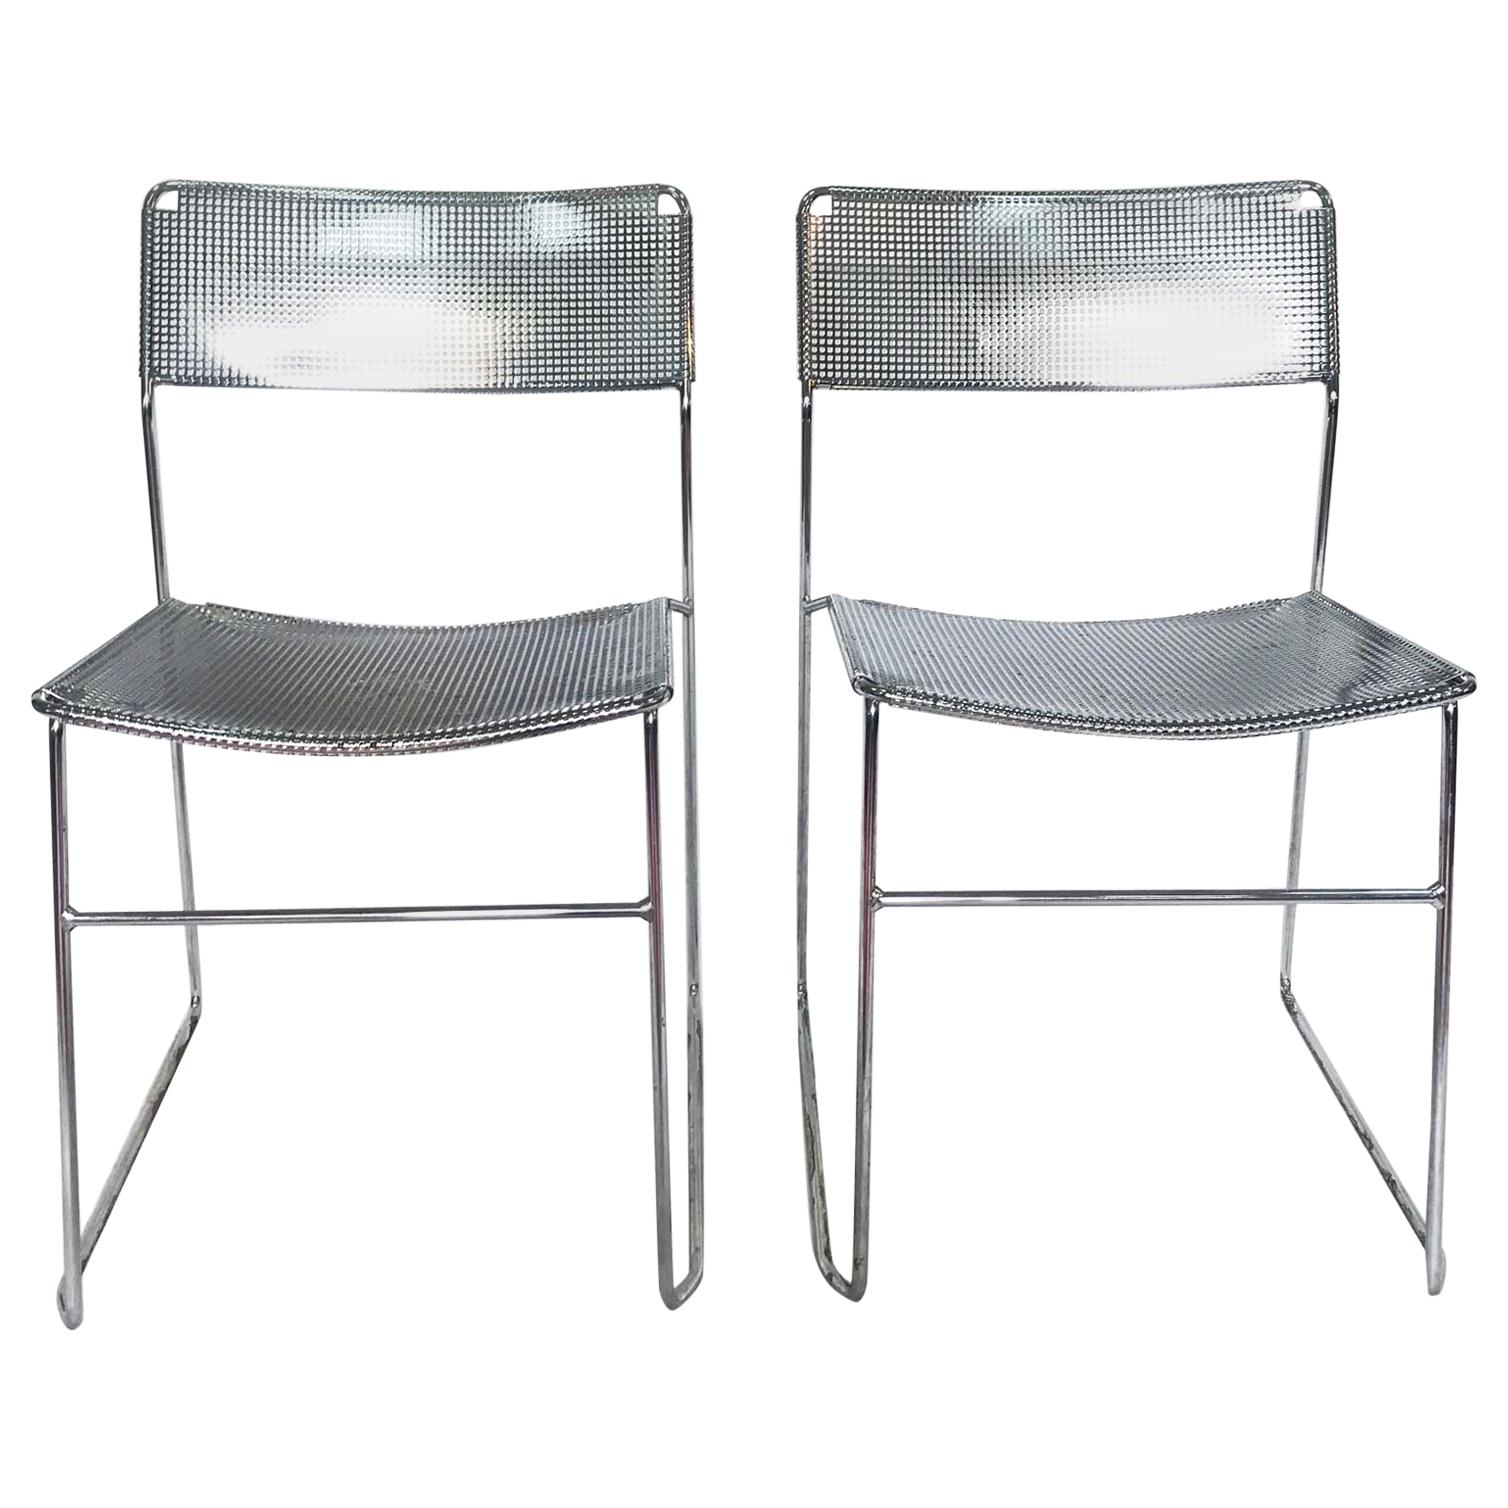 Vintage Perforated Chrome & Steel Chairs by Niels Jorgen Haugesen for Magis, Set